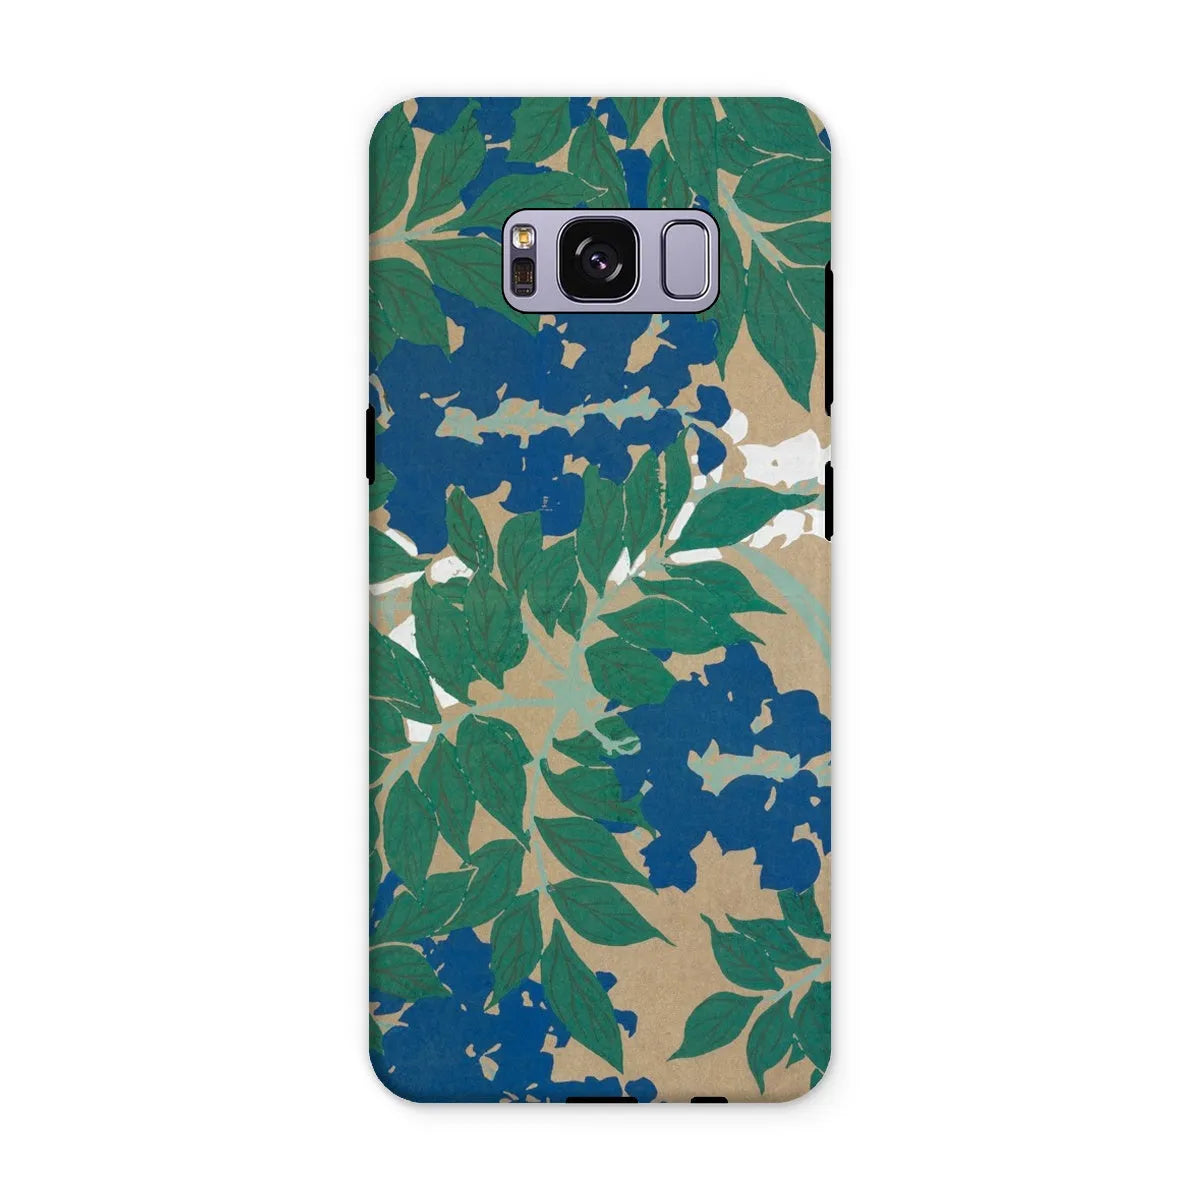 Wisteria From Momoyogusa - Floral Phone Case - Kamisaka Sekka - Samsung Galaxy S8 Plus / Matte - Mobile Phone Cases